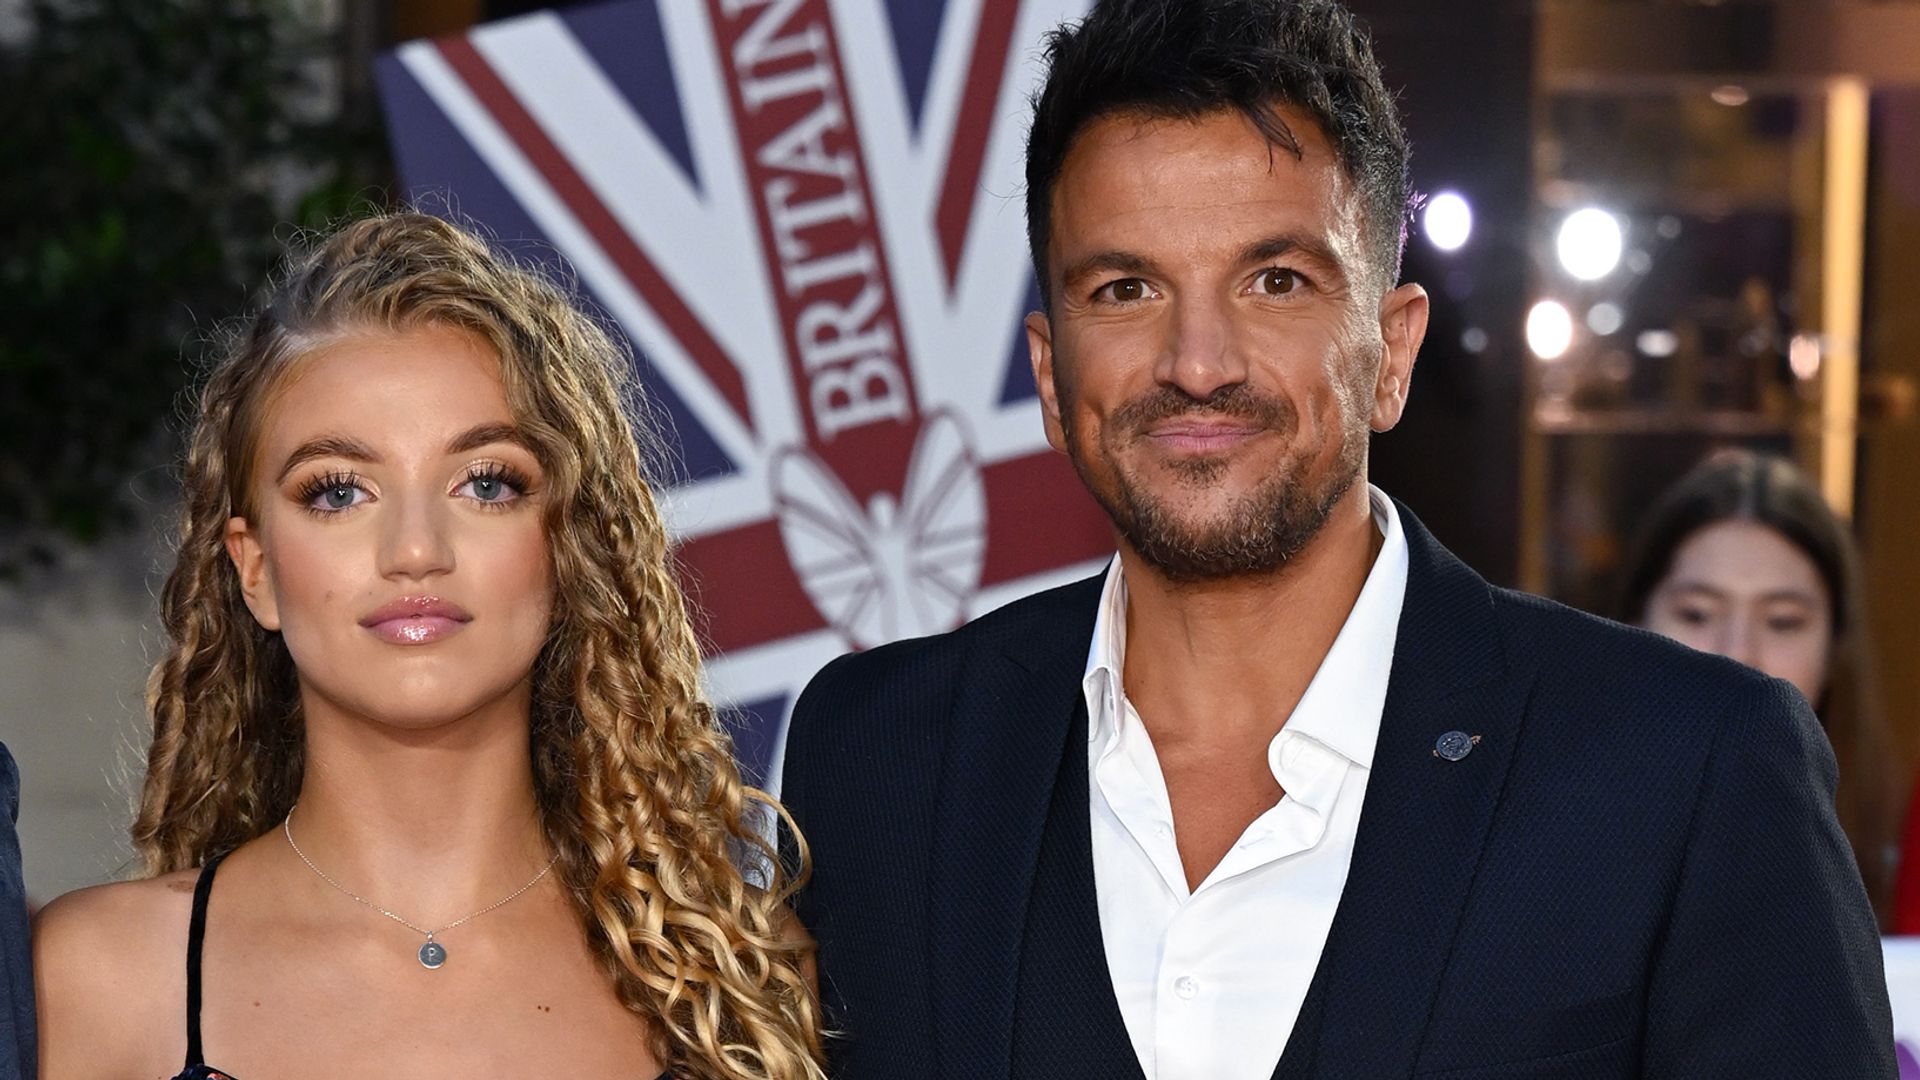 Peter Andre and Princess Andre posing red carpet